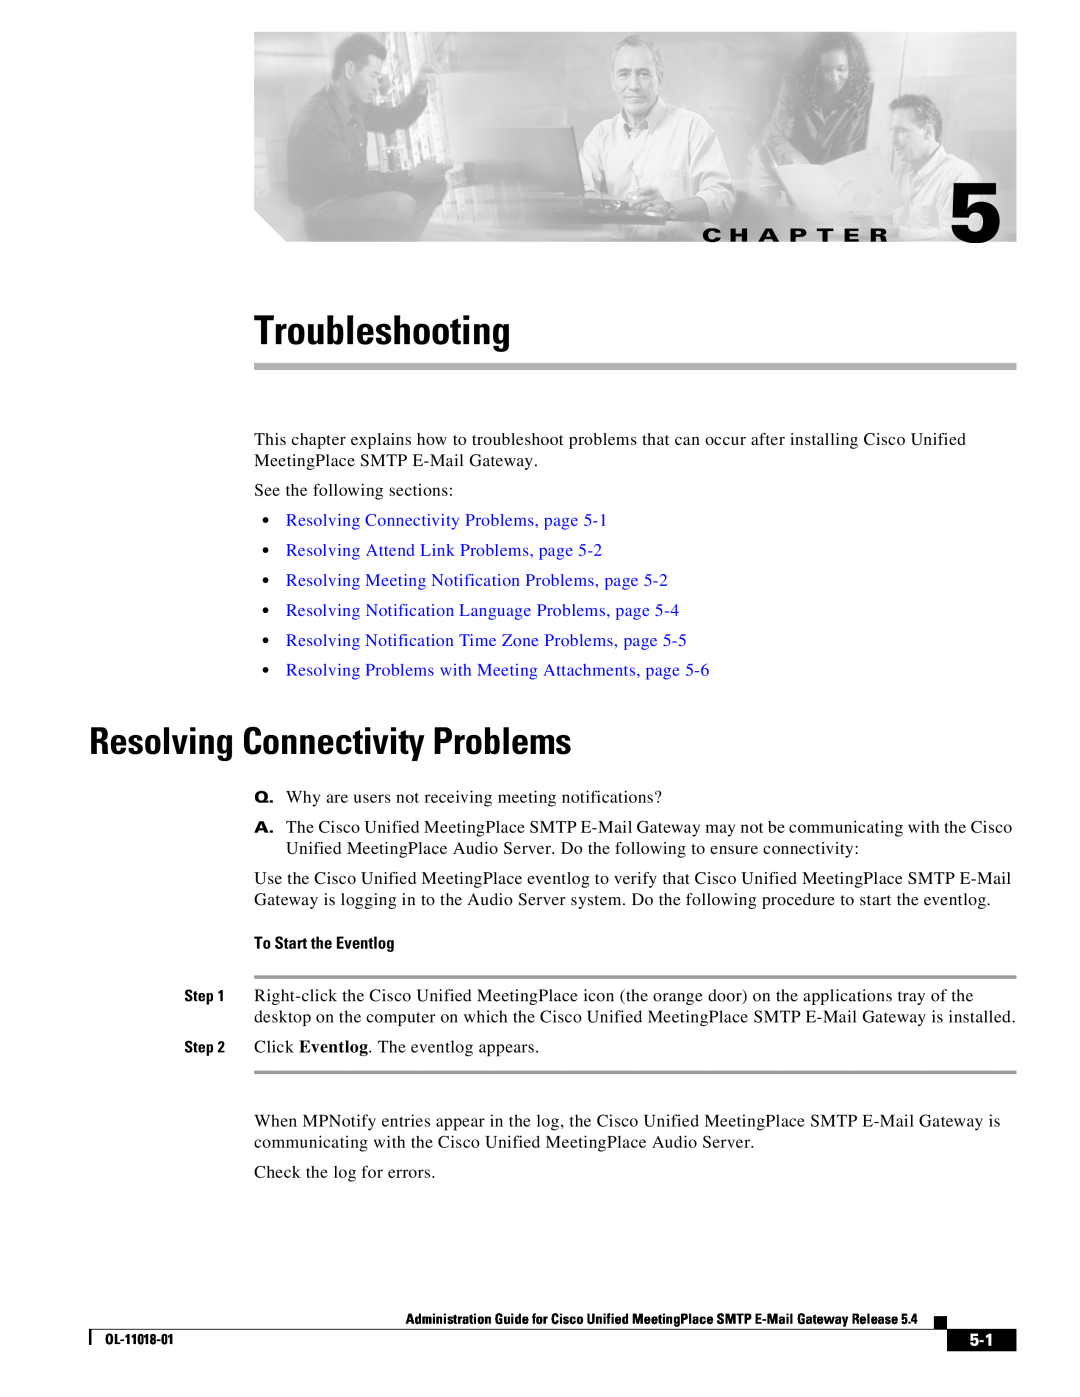 Cisco Systems SMTP manual Troubleshooting, C H A P T E R, Resolving Connectivity Problems, page, To Start the Eventlog 